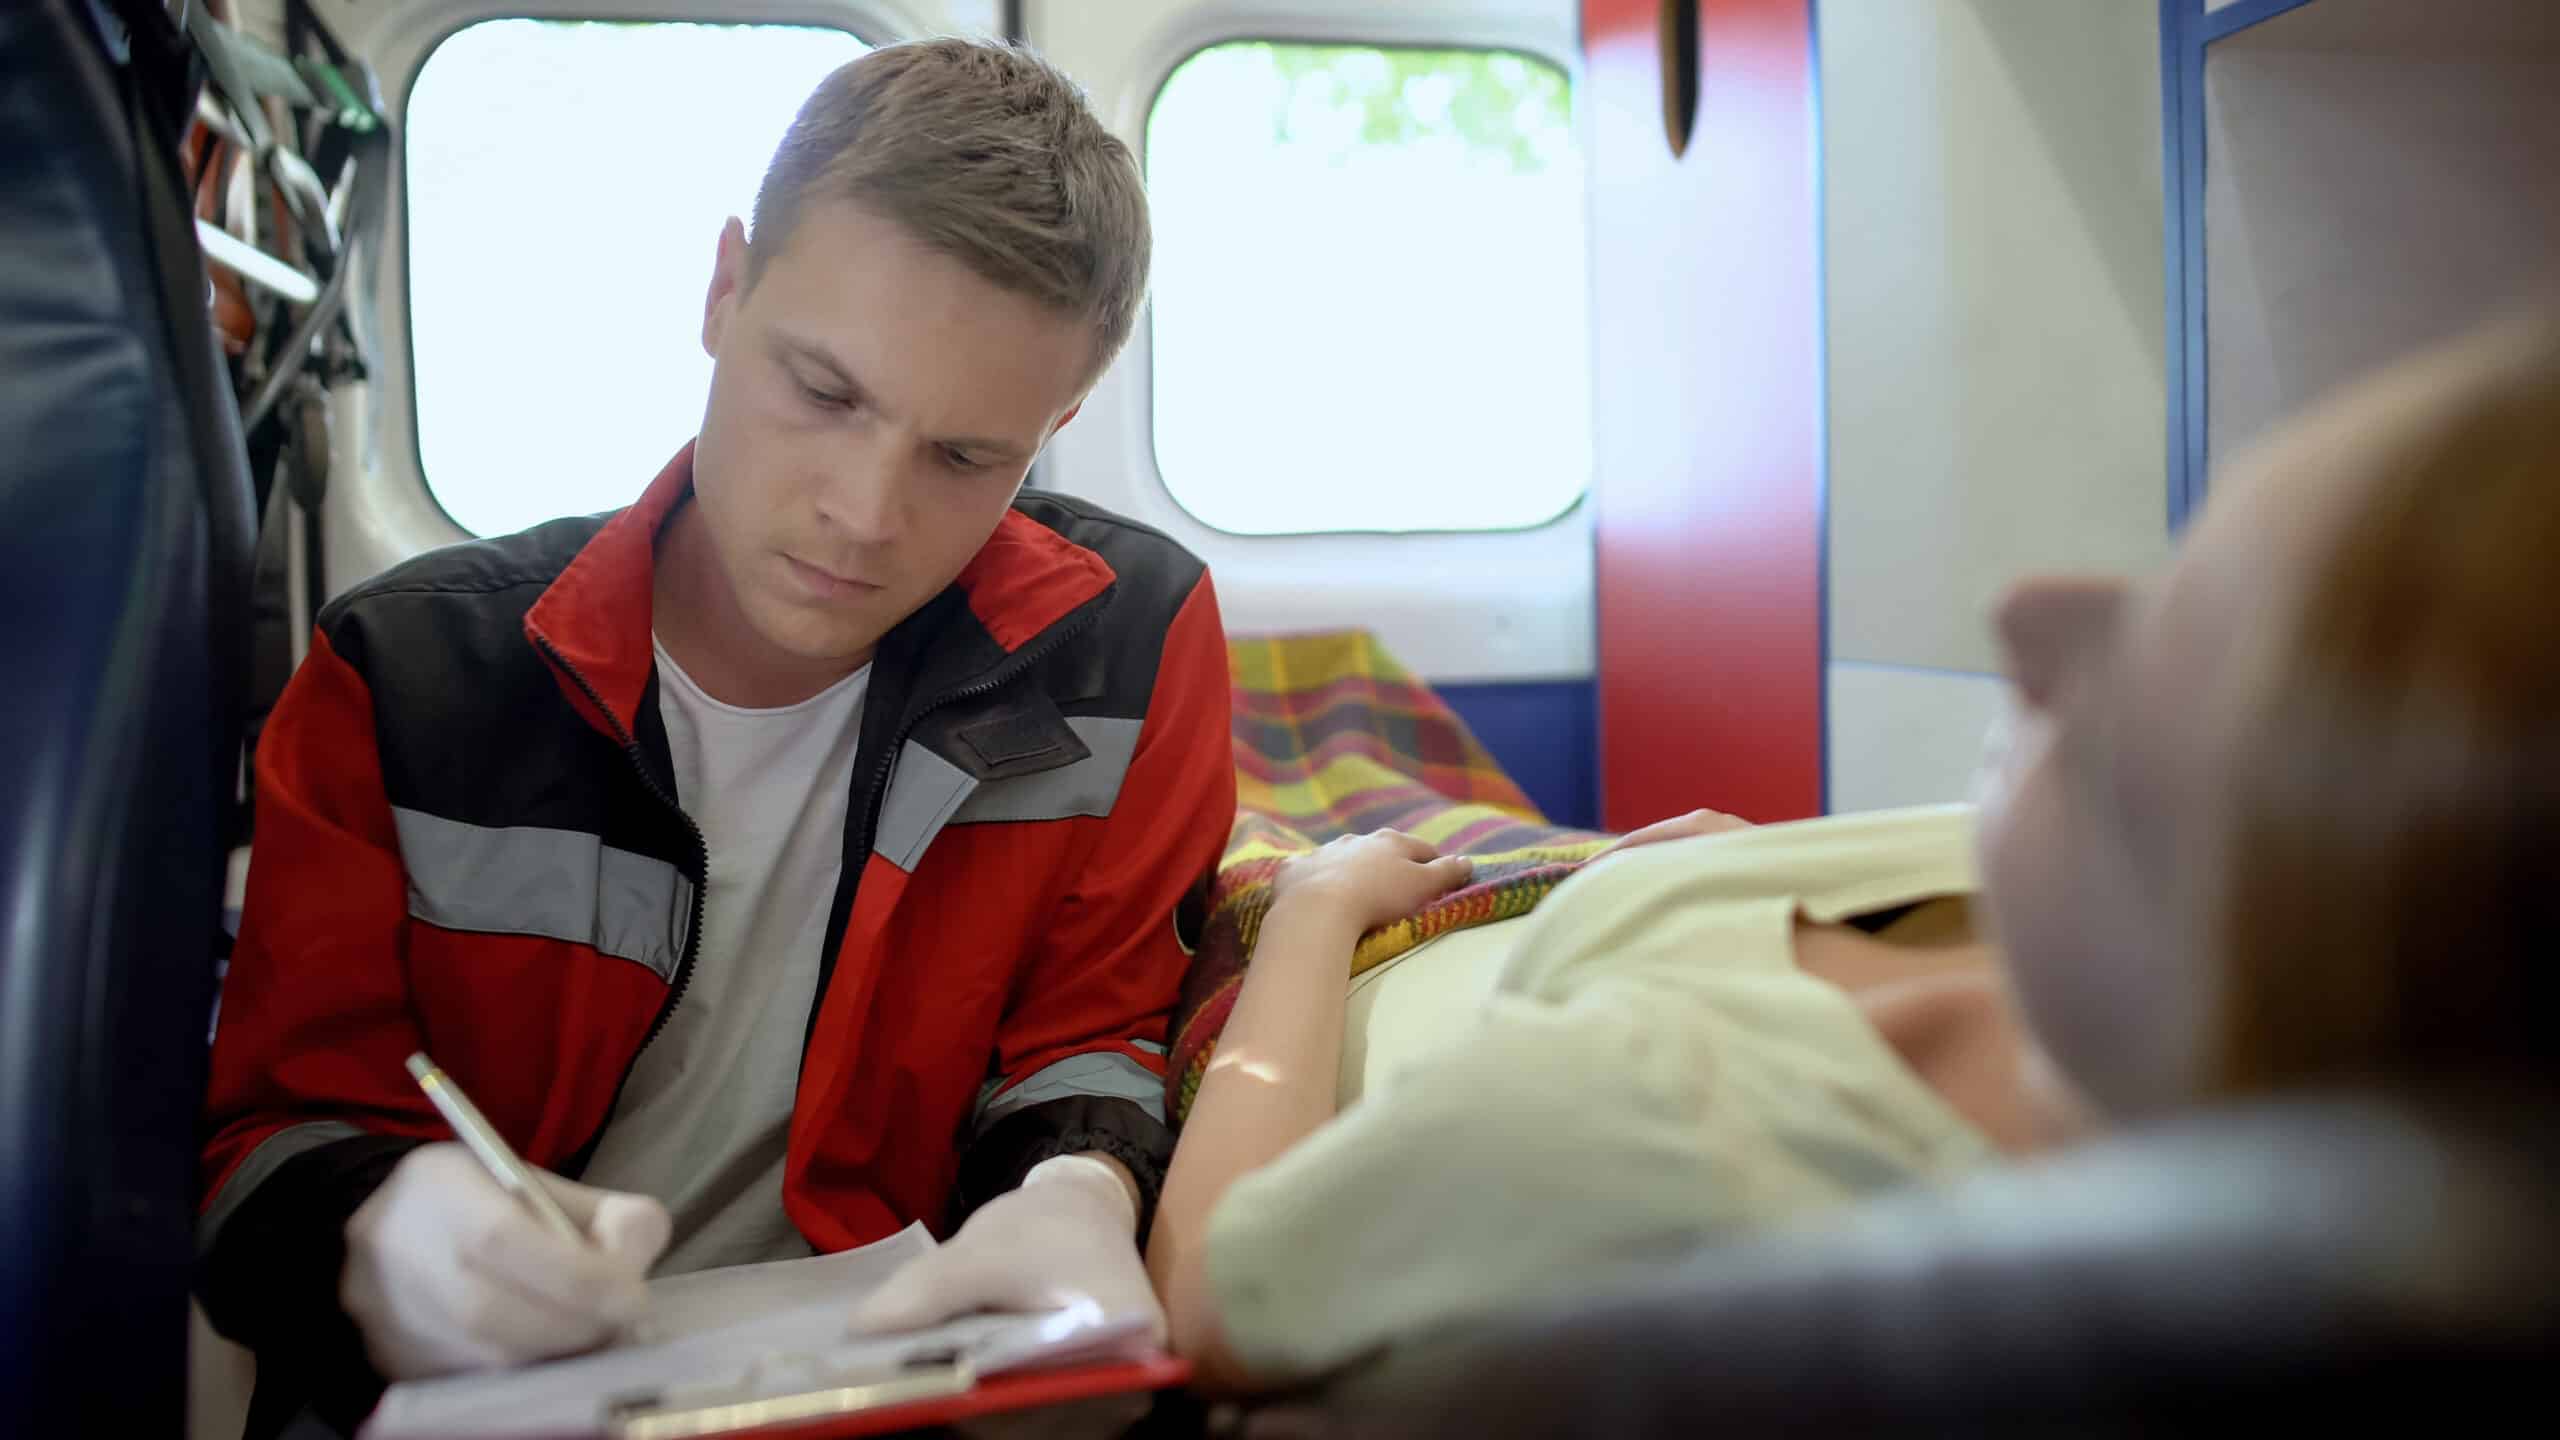 EMT Training: How To Become An EMT